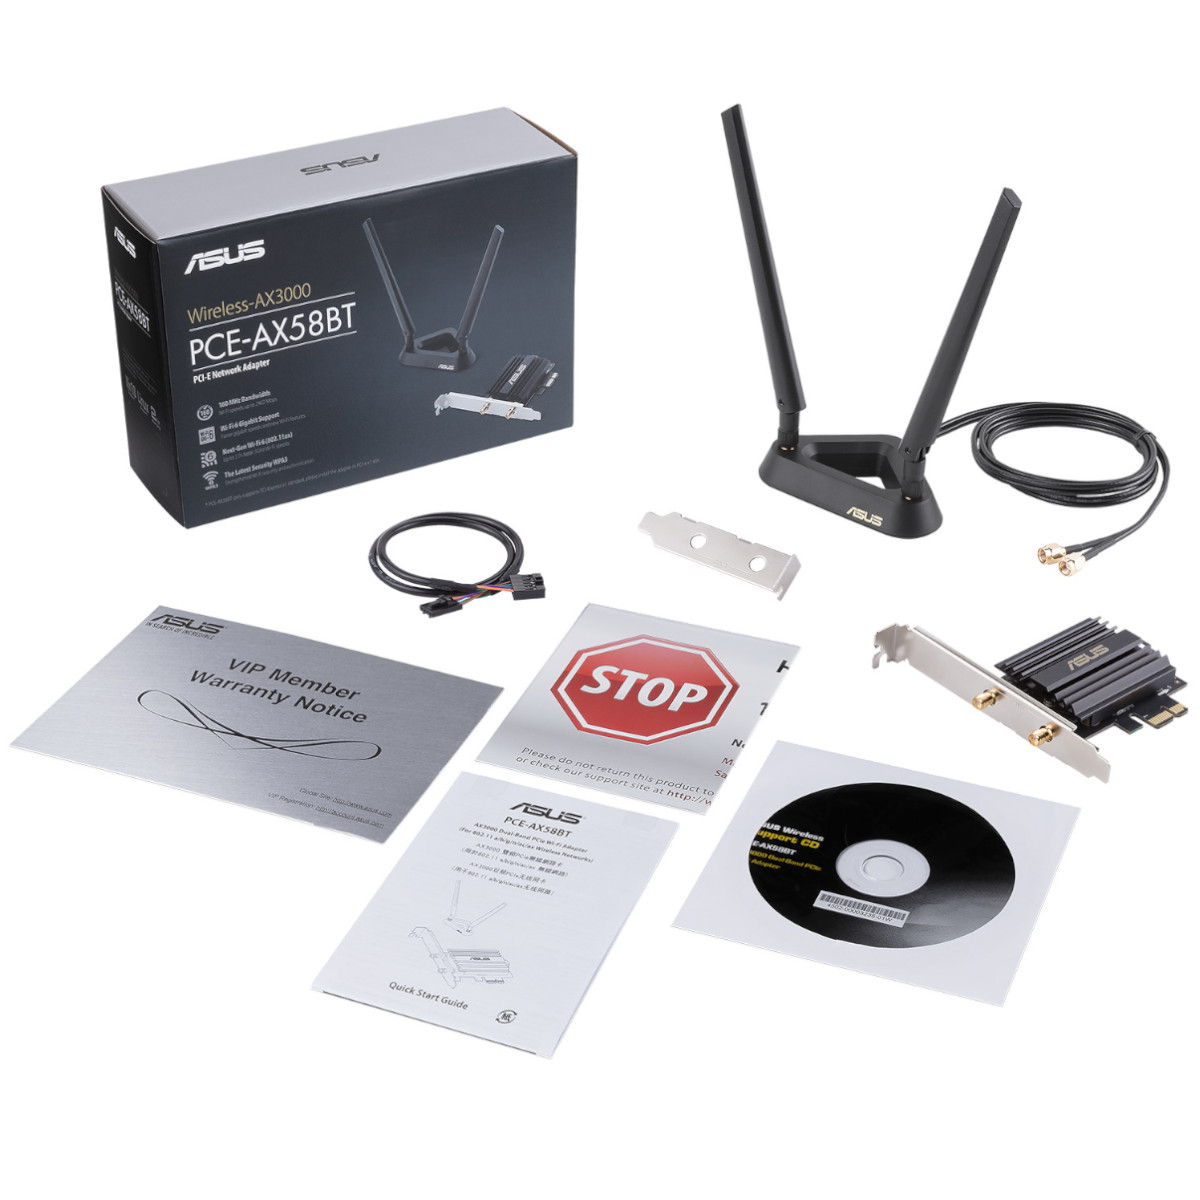 Asus - ASUS PCE-AX58BT Dual-Band Wireless AX3000 (WiFi 6) Bluetooth 5.0 PCI-E Adapter